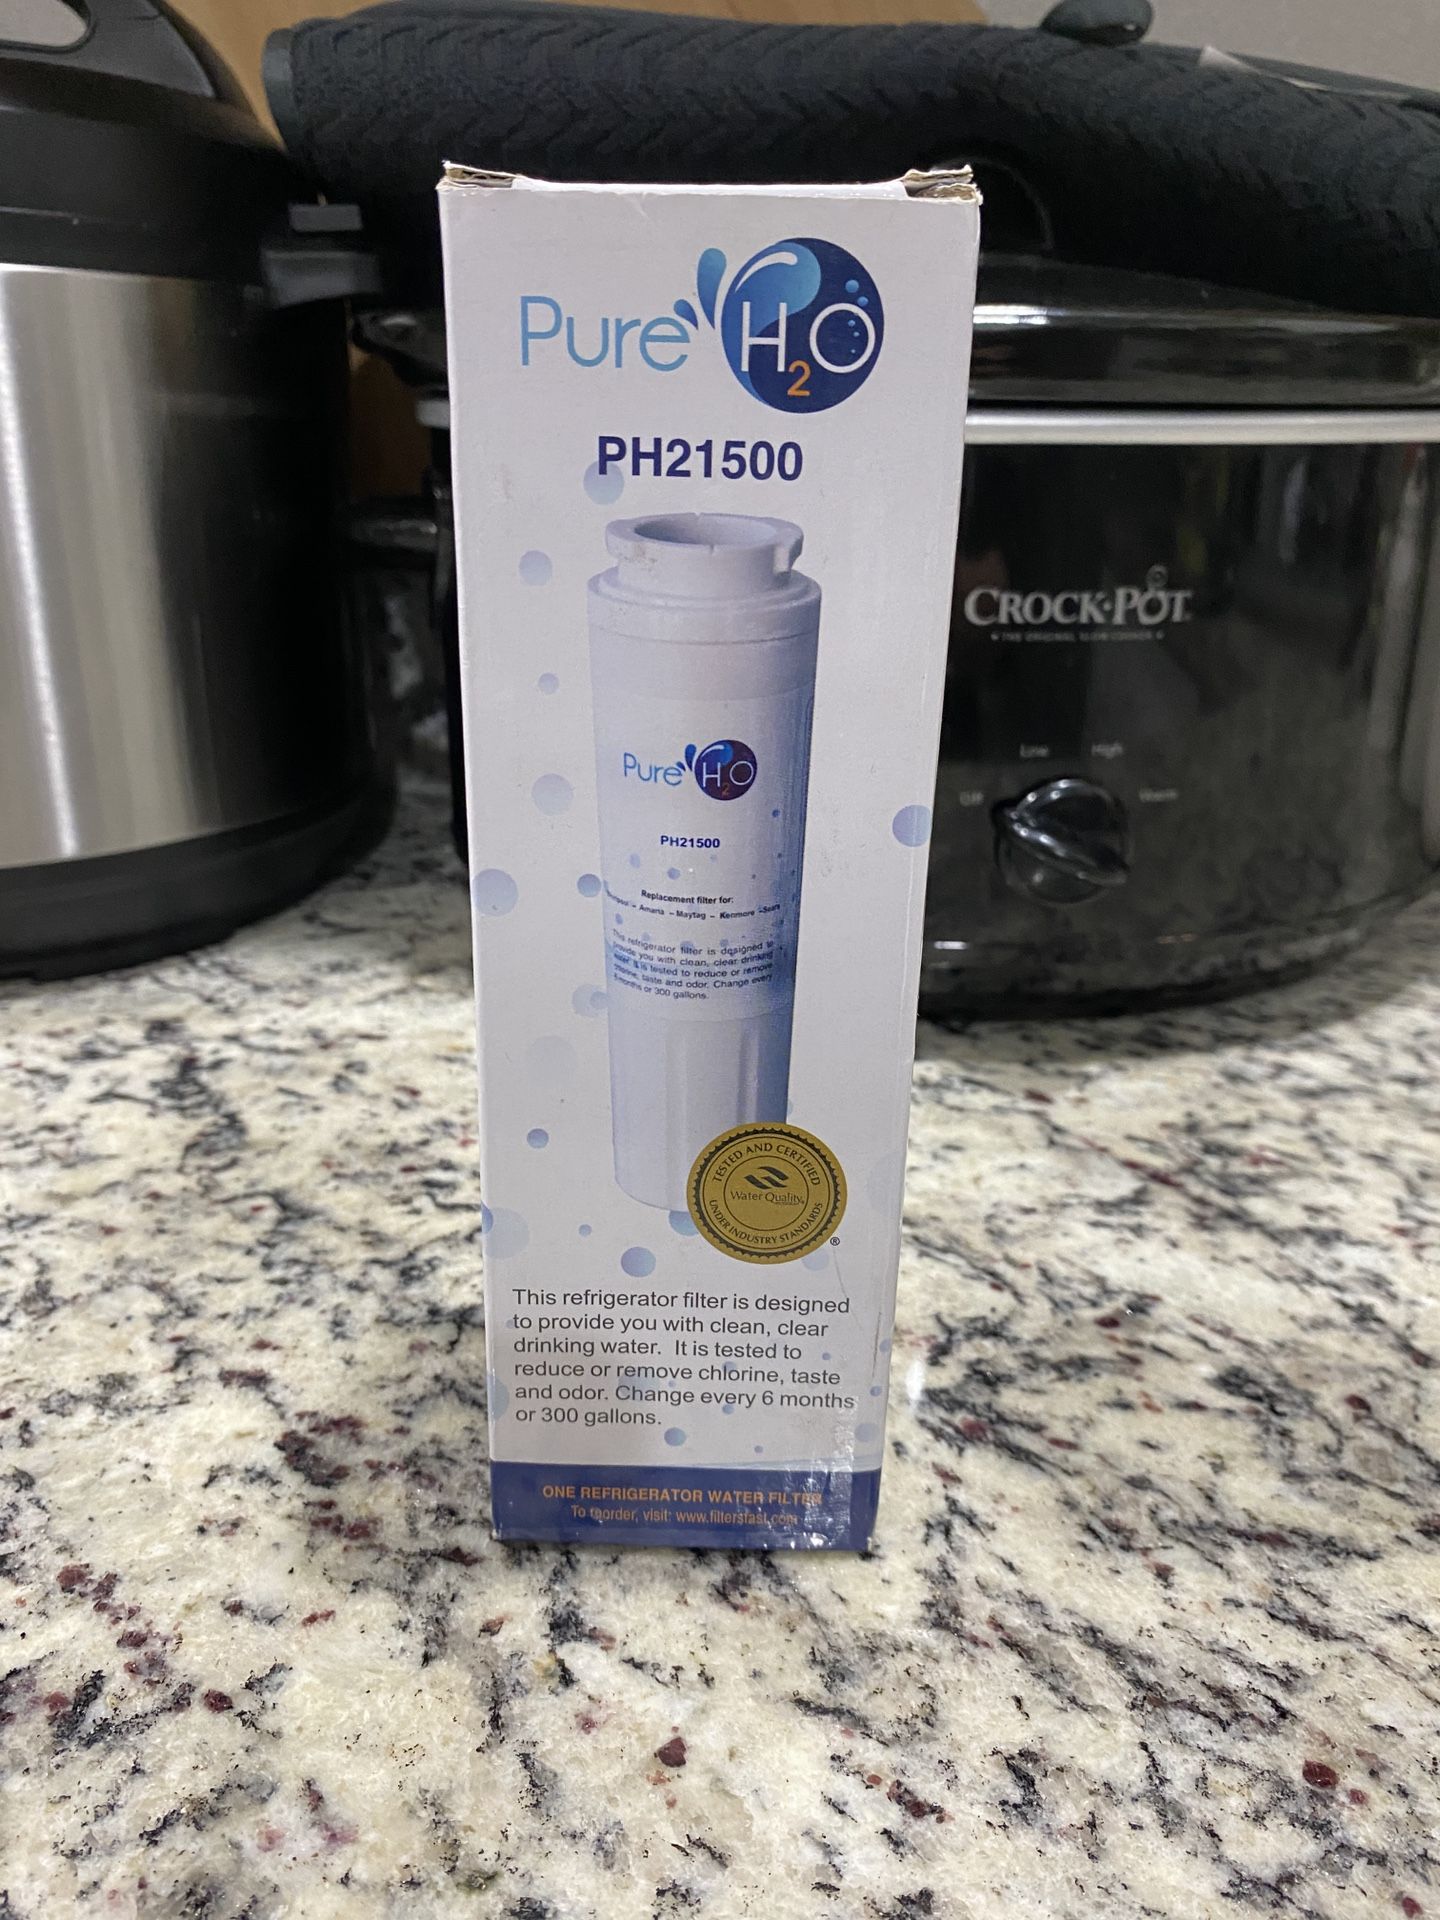 Brand new never openPure H20 PH21500 Refrigerator Water Filter -Whirlpool Amana Kenmore - New Sealed